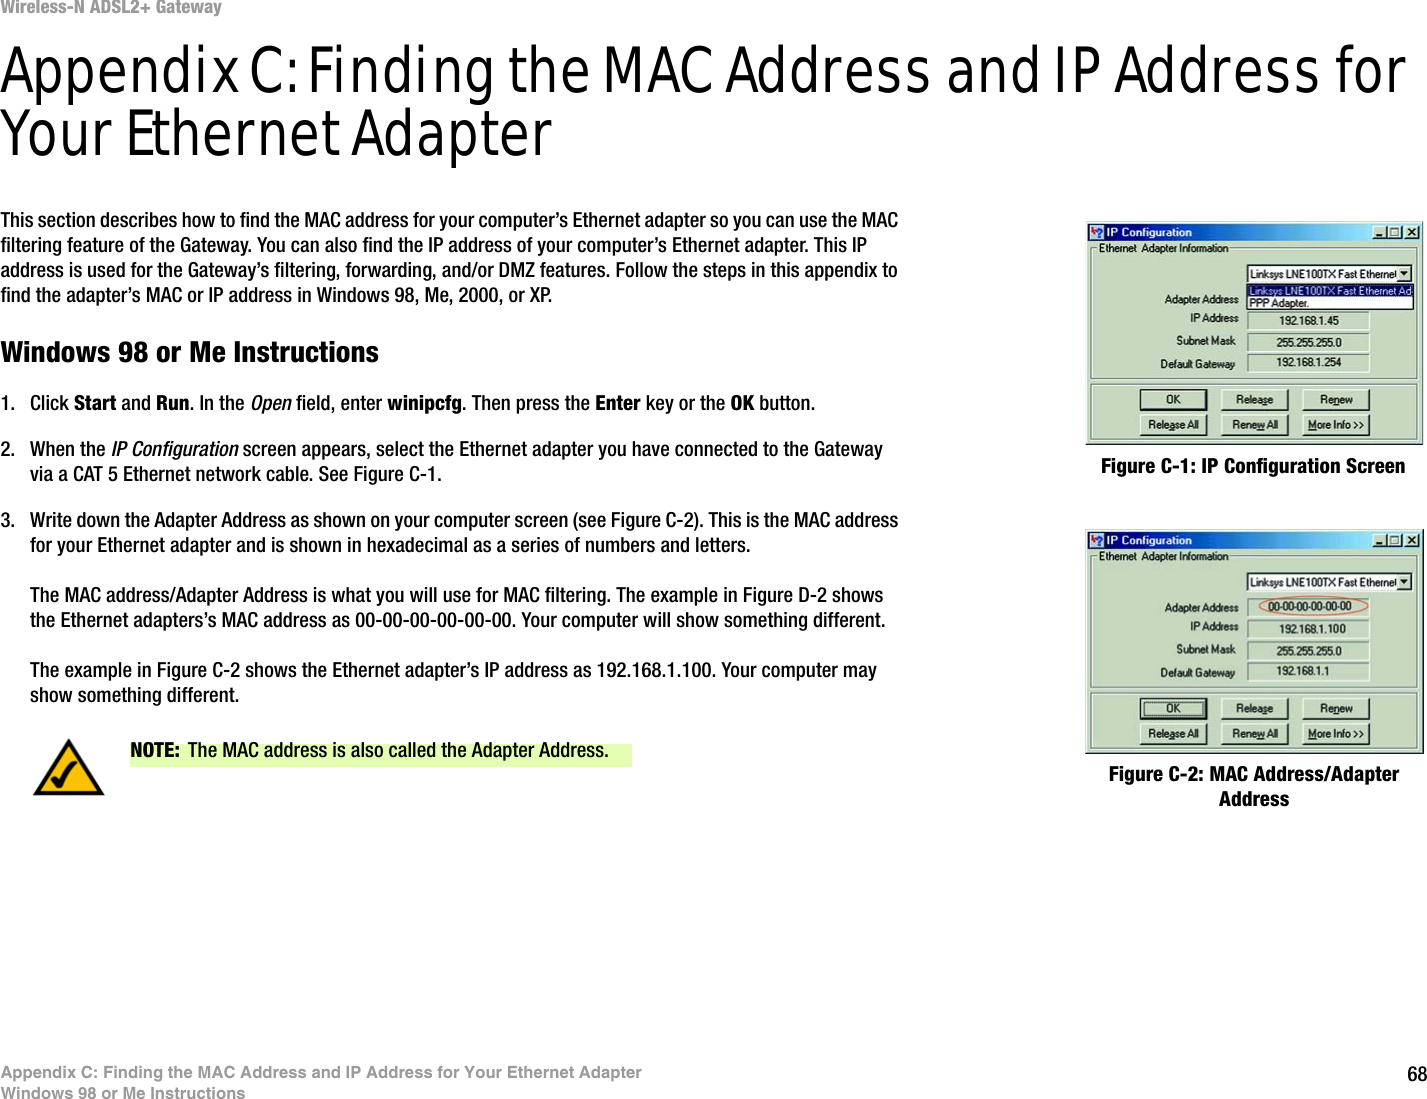 68Appendix C: Finding the MAC Address and IP Address for Your Ethernet AdapterWindows 98 or Me InstructionsWireless-N ADSL2+ GatewayAppendix C: Finding the MAC Address and IP Address for Your Ethernet AdapterThis section describes how to find the MAC address for your computer’s Ethernet adapter so you can use the MAC filtering feature of the Gateway. You can also find the IP address of your computer’s Ethernet adapter. This IP address is used for the Gateway’s filtering, forwarding, and/or DMZ features. Follow the steps in this appendix to find the adapter’s MAC or IP address in Windows 98, Me, 2000, or XP.Windows 98 or Me Instructions1. Click Start and Run. In the Open field, enter winipcfg. Then press the Enter key or the OK button. 2. When the IP Configuration screen appears, select the Ethernet adapter you have connected to the Gateway via a CAT 5 Ethernet network cable. See Figure C-1.3. Write down the Adapter Address as shown on your computer screen (see Figure C-2). This is the MAC address for your Ethernet adapter and is shown in hexadecimal as a series of numbers and letters.The MAC address/Adapter Address is what you will use for MAC filtering. The example in Figure D-2 shows the Ethernet adapters’s MAC address as 00-00-00-00-00-00. Your computer will show something different.The example in Figure C-2 shows the Ethernet adapter’s IP address as 192.168.1.100. Your computer may show something different.Figure C-2: MAC Address/Adapter AddressFigure C-1: IP Configuration ScreenNOTE: The MAC address is also called the Adapter Address.